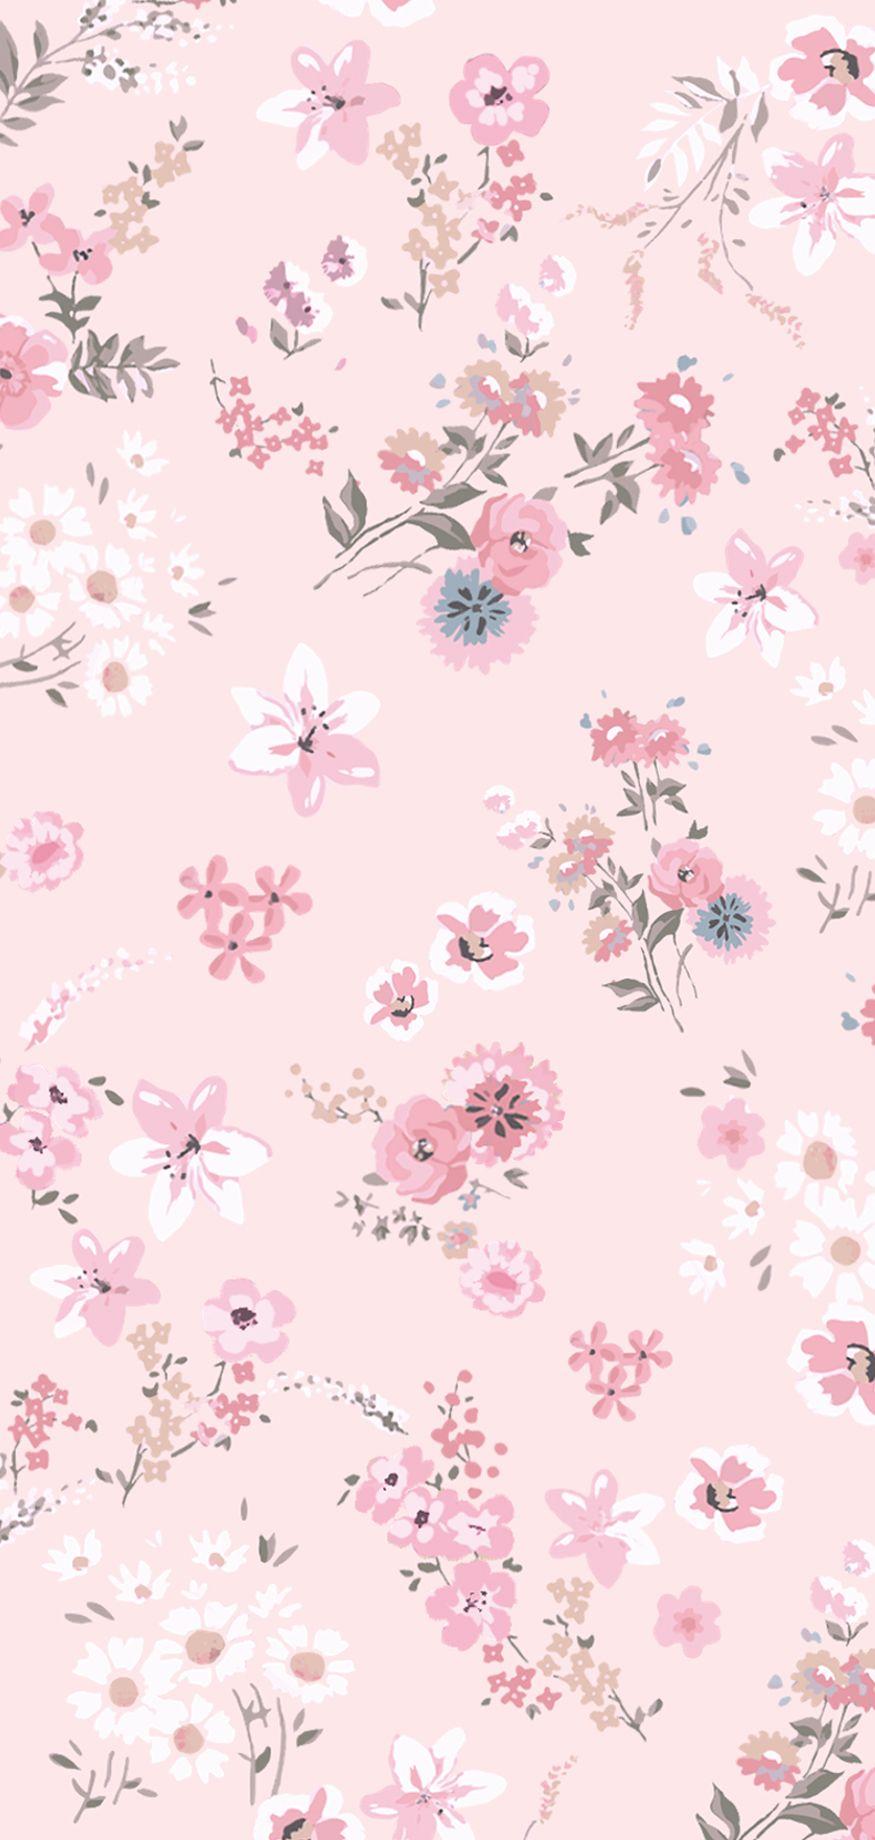 Tiny Flowers. Pastel iphone wallpaper, Floral wallpaper iphone, Flower phone wallpaper